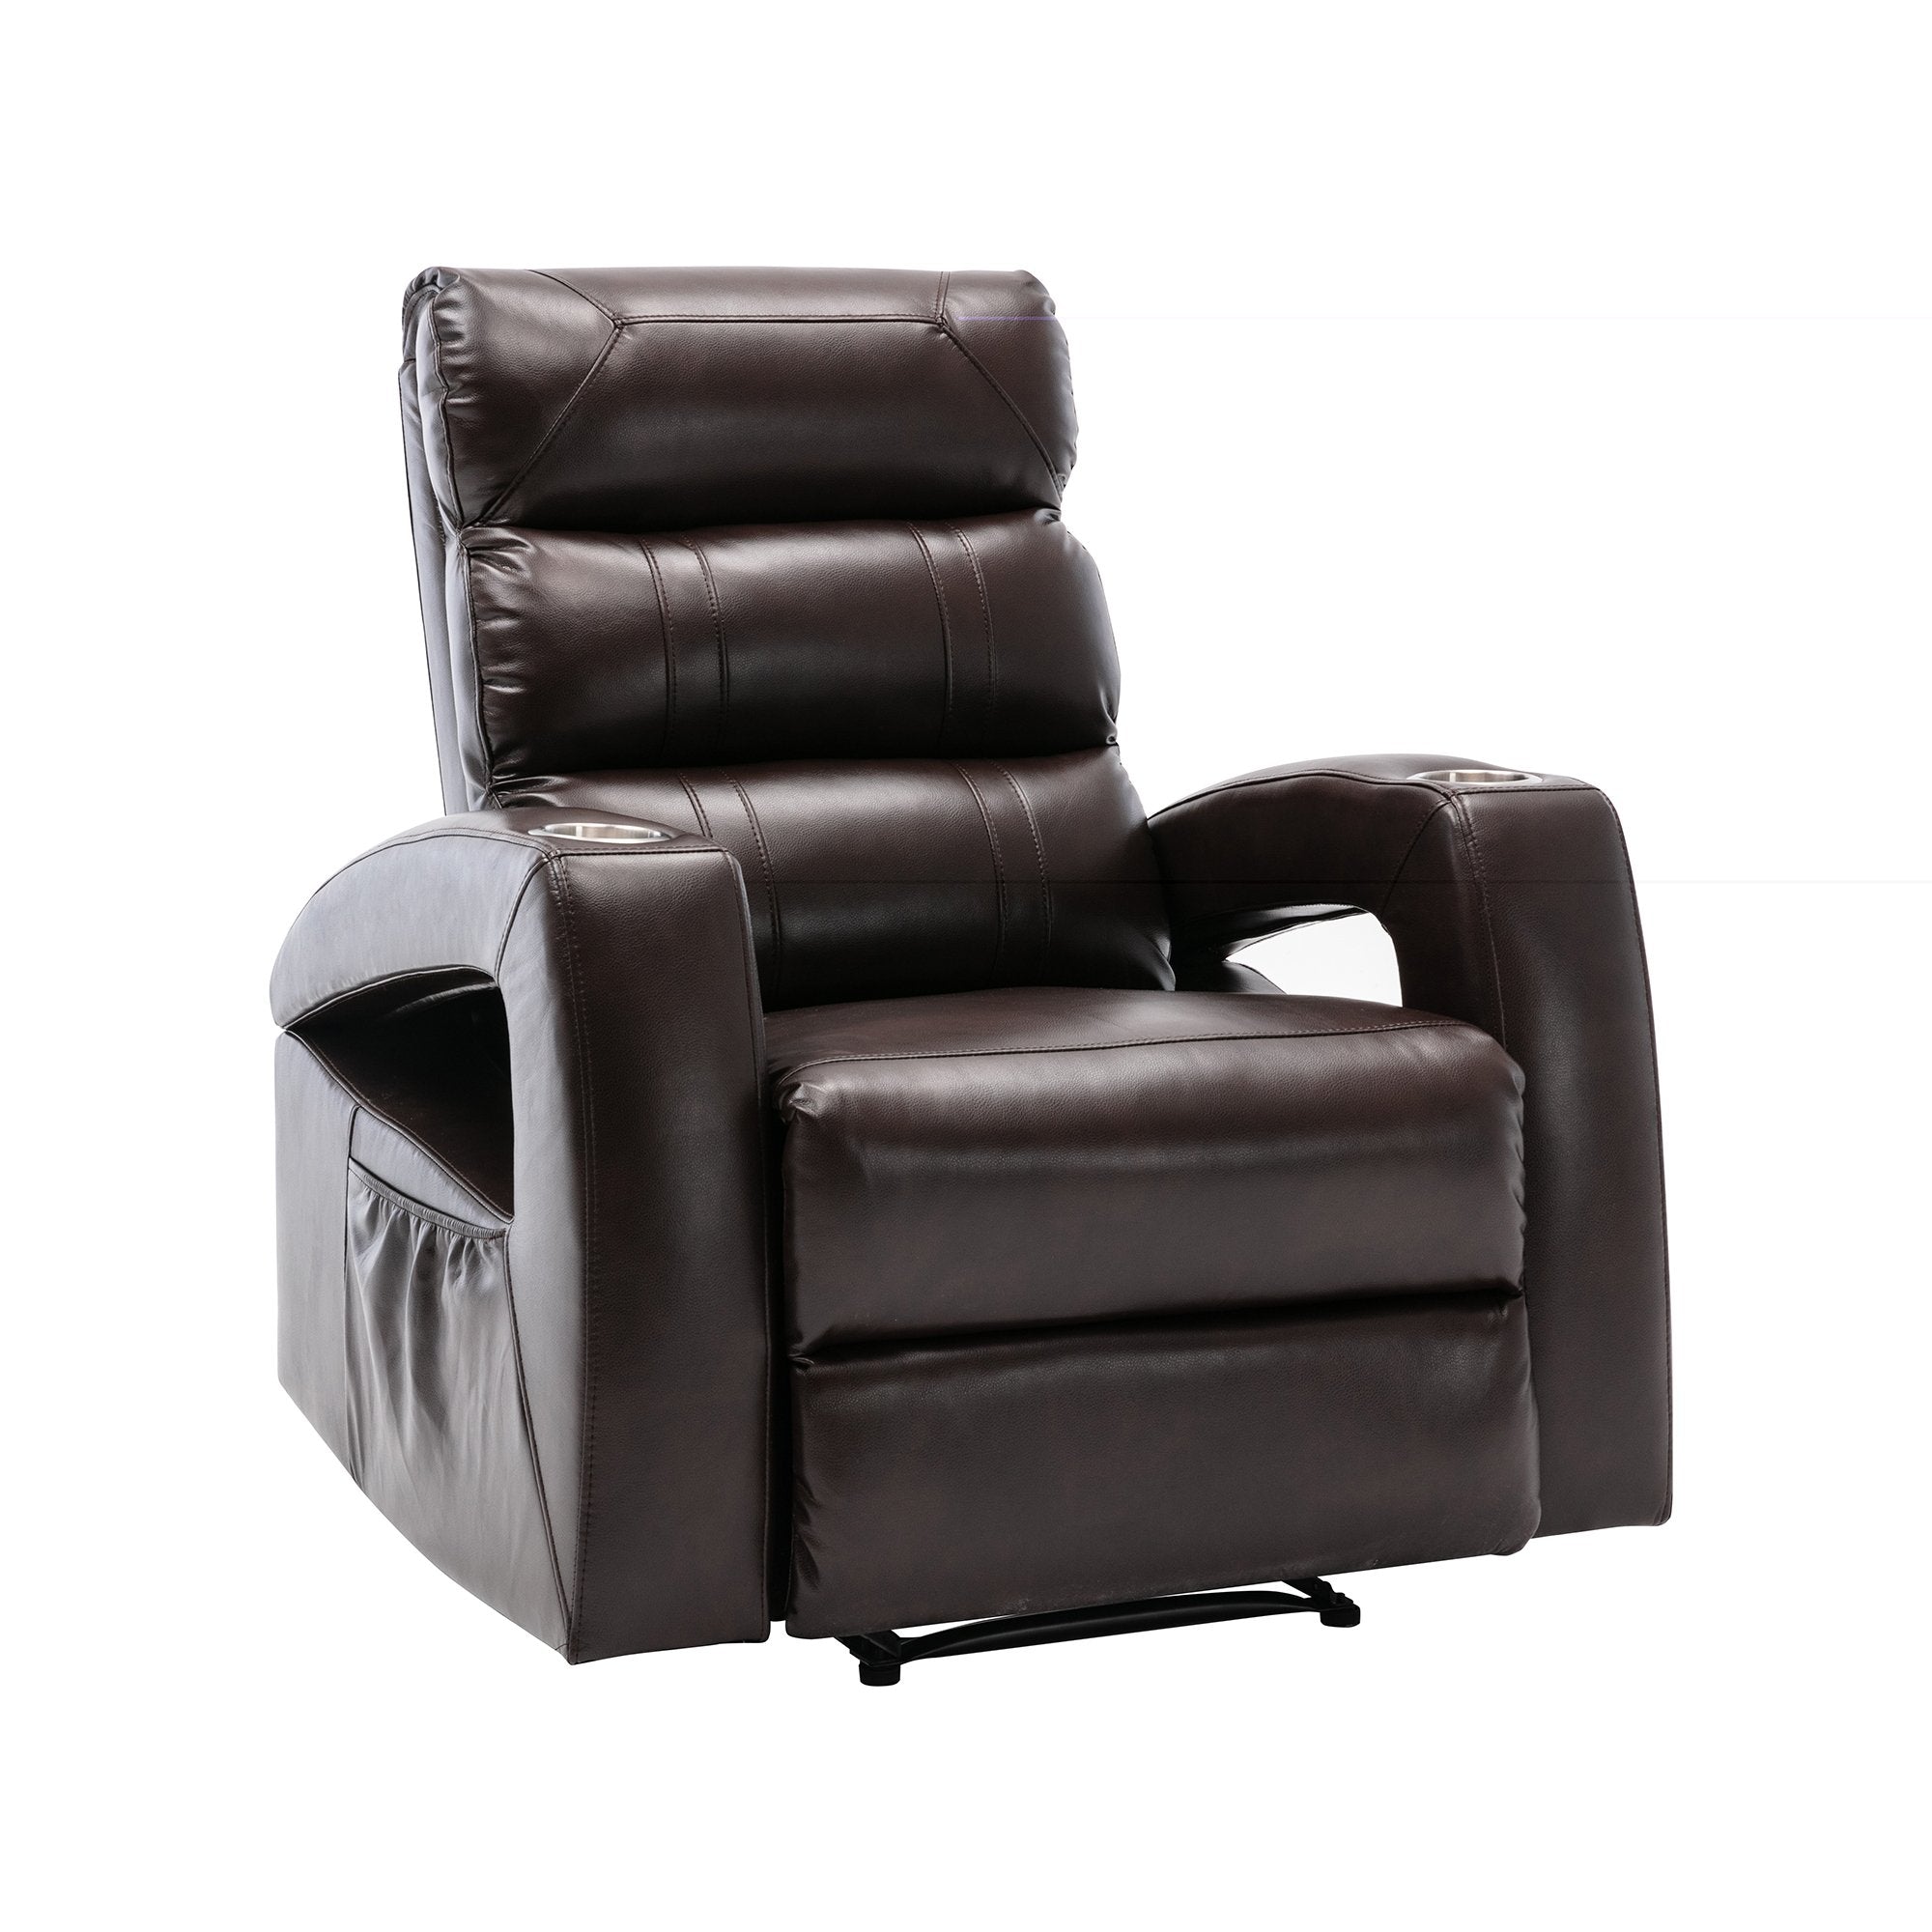 Power Motion Recliner with USB Charge Port and Two Cup Holders -PU Leather Lounge chair